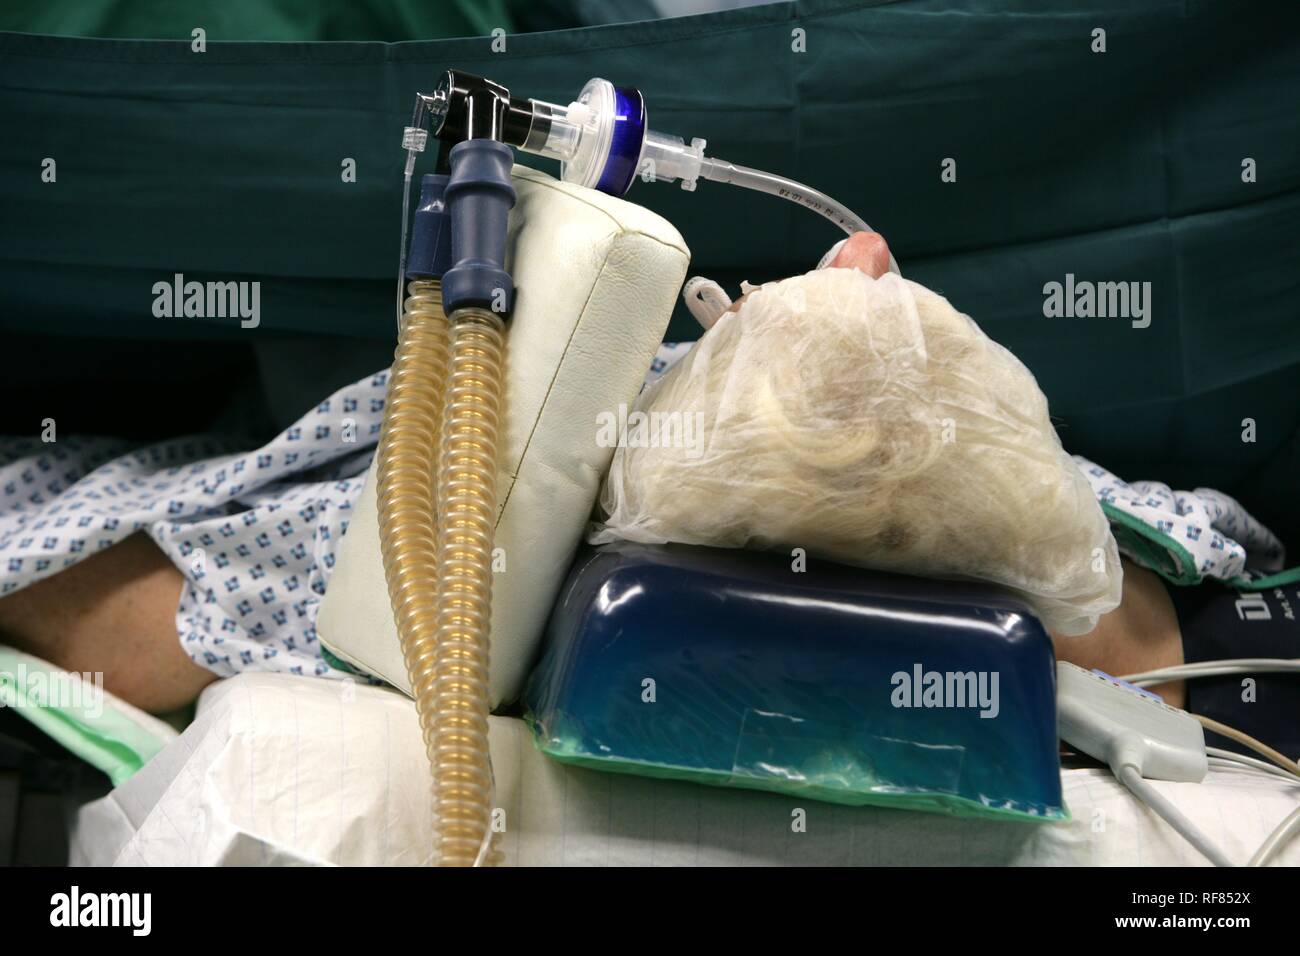 Patient during operation, artificial respiration, Germany Stock Photo